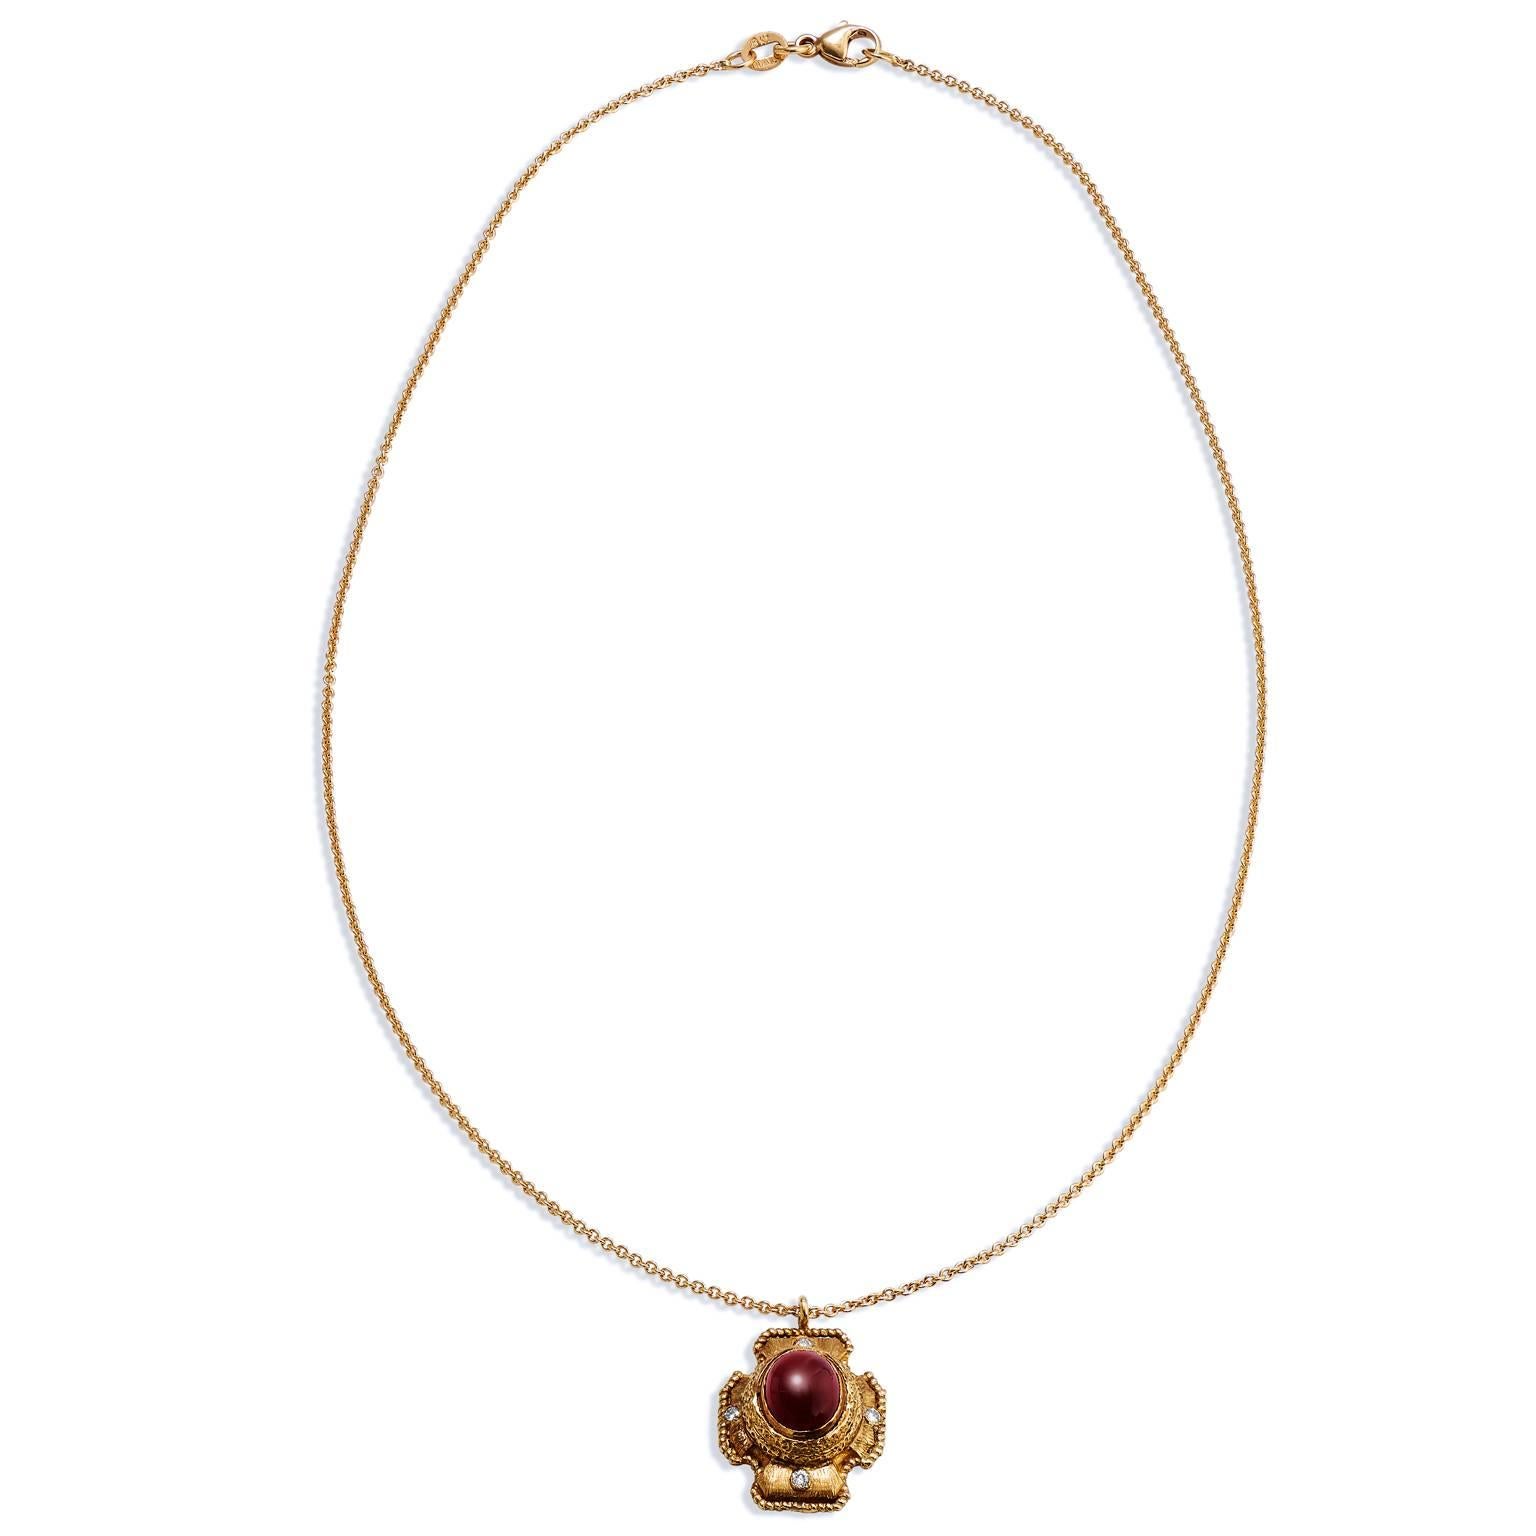 Stately in appearance, this handmade 18 karat yellow gold pendant on a pearl by the yard necklace features a striking rhodolite garnet at center with accompanying 0.12  carat of diamond to accent the varying hues of red.